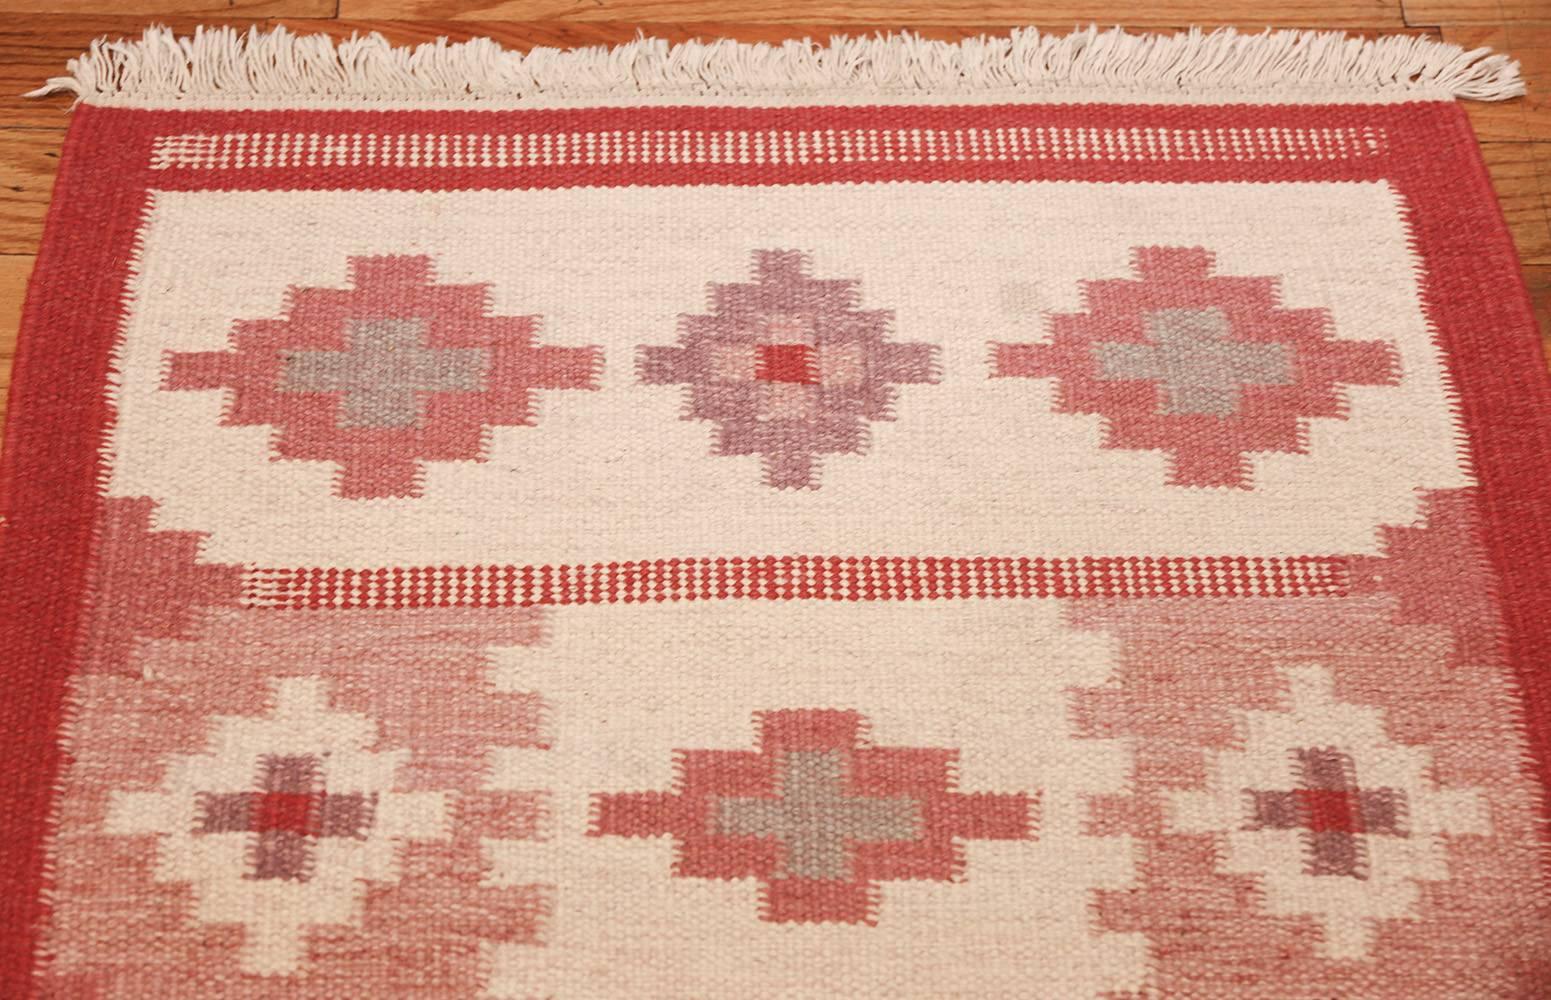 Beautiful and quite rare vintage flat-woven Swedish Kilim runner rug, country of origin / rug type: Scandinavian rugs, date circa mid-20th century. Proving that a monochrome theme need not lack for vibrancy, this vintage Scandinavian rug displays a